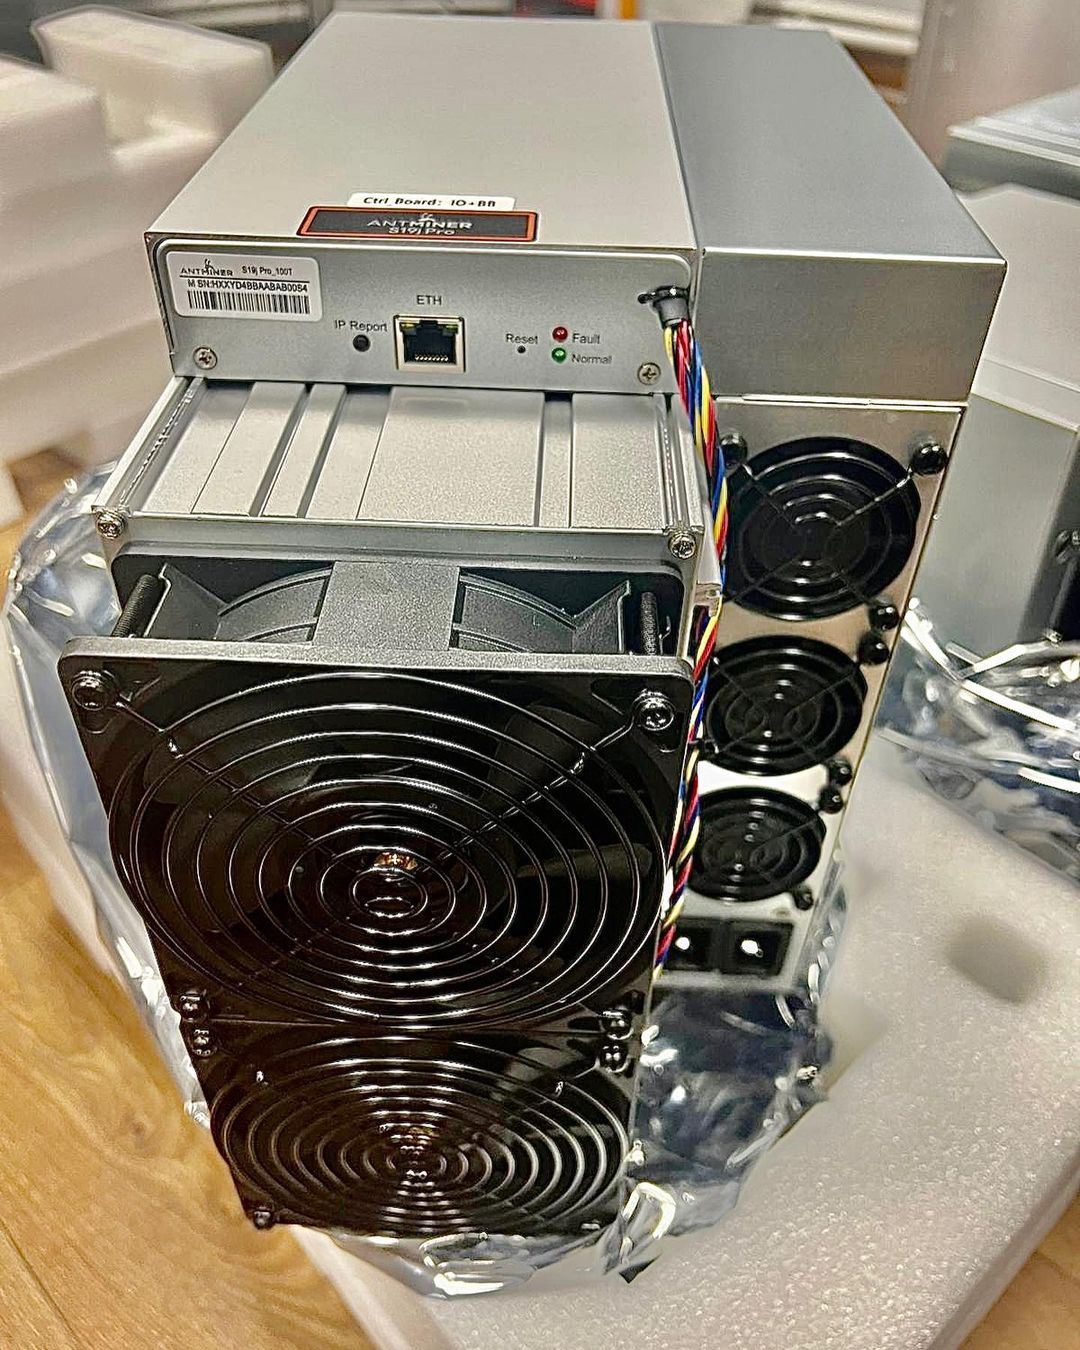 Antminer S19j Pro (104Th) Bitcoin Miner with PSU